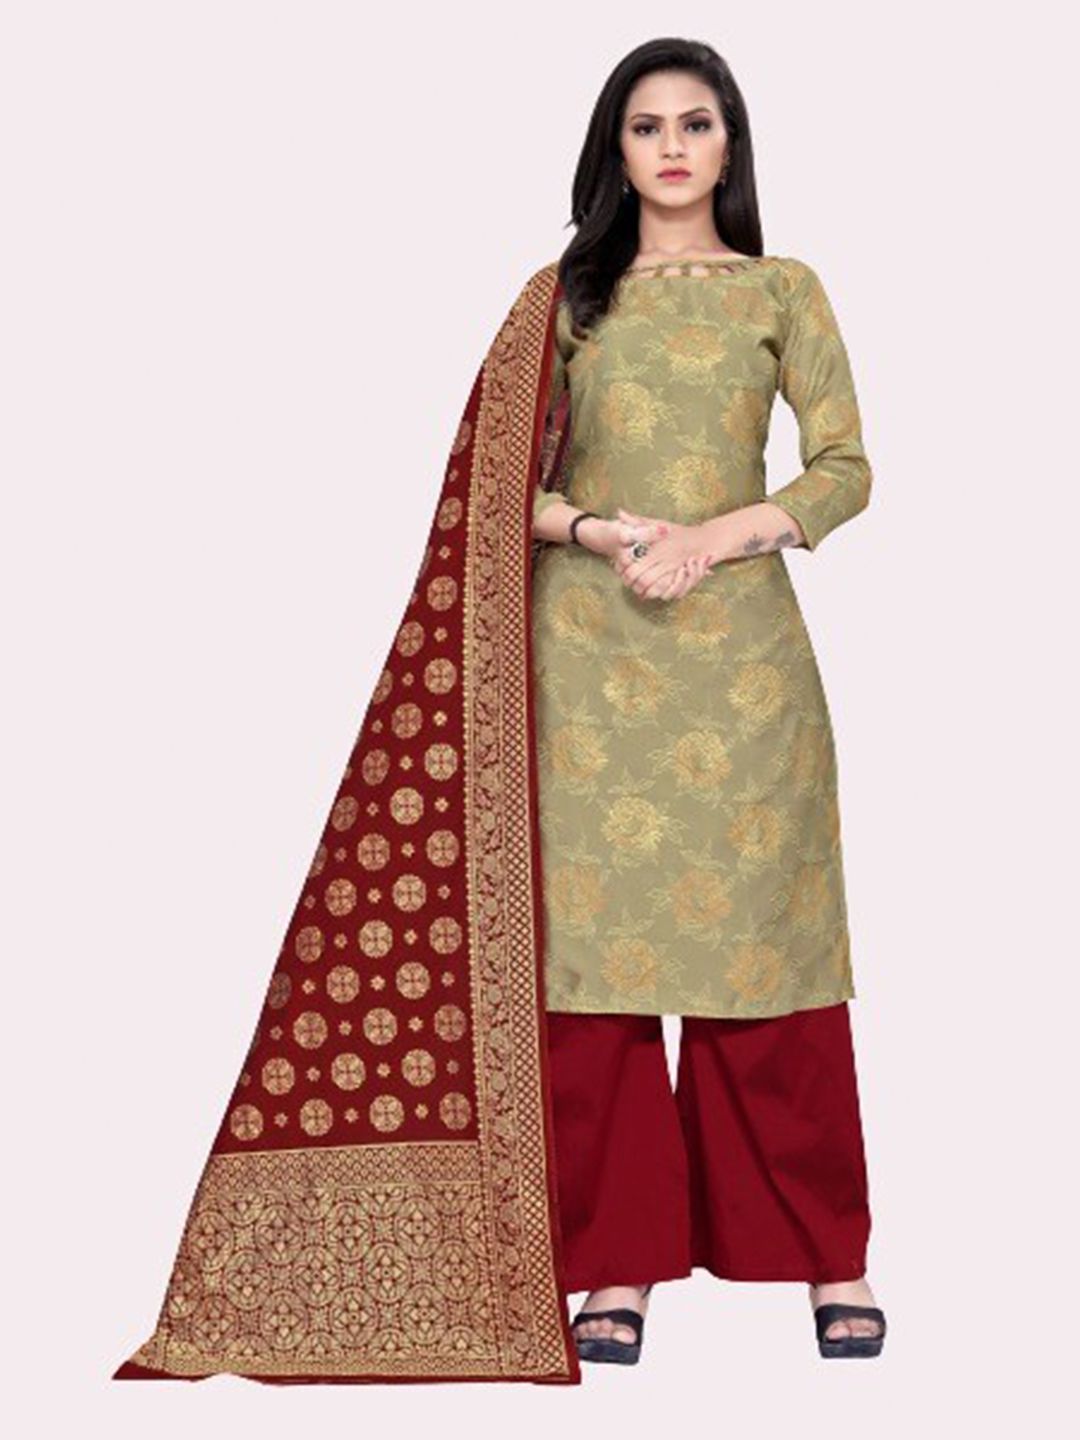 MORLY Beige & Maroon Woven Design Dupion Silk Unstitched Dress Material Price in India